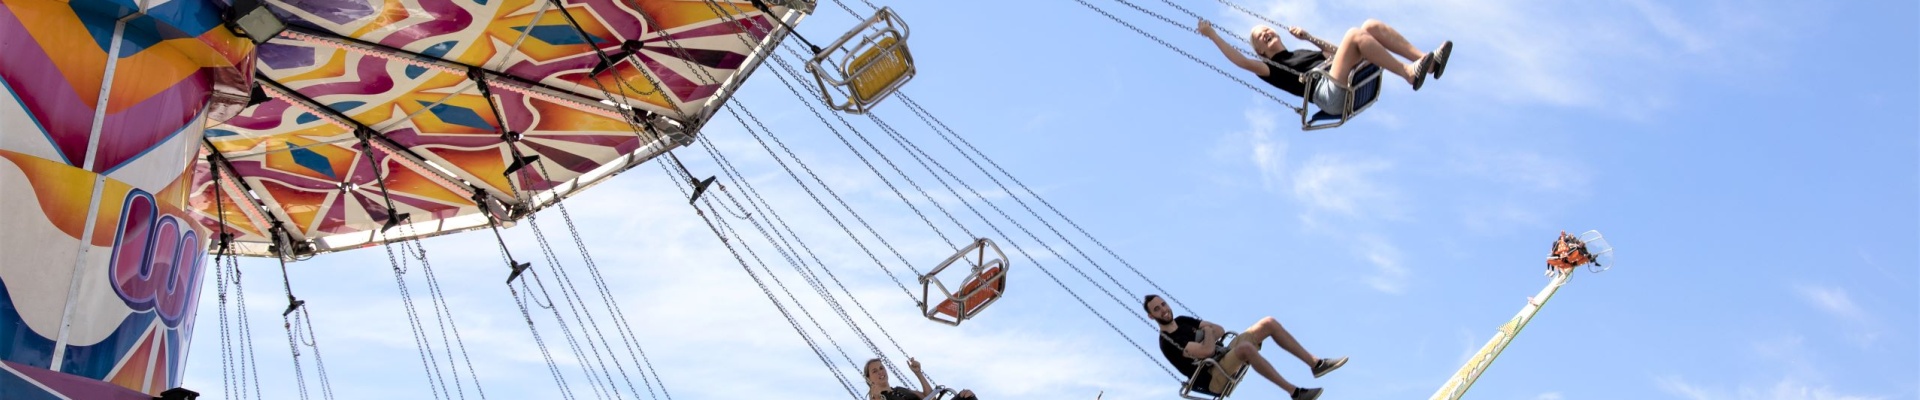  The Wave Swinger at the Perth Royal Show 28 September 2018